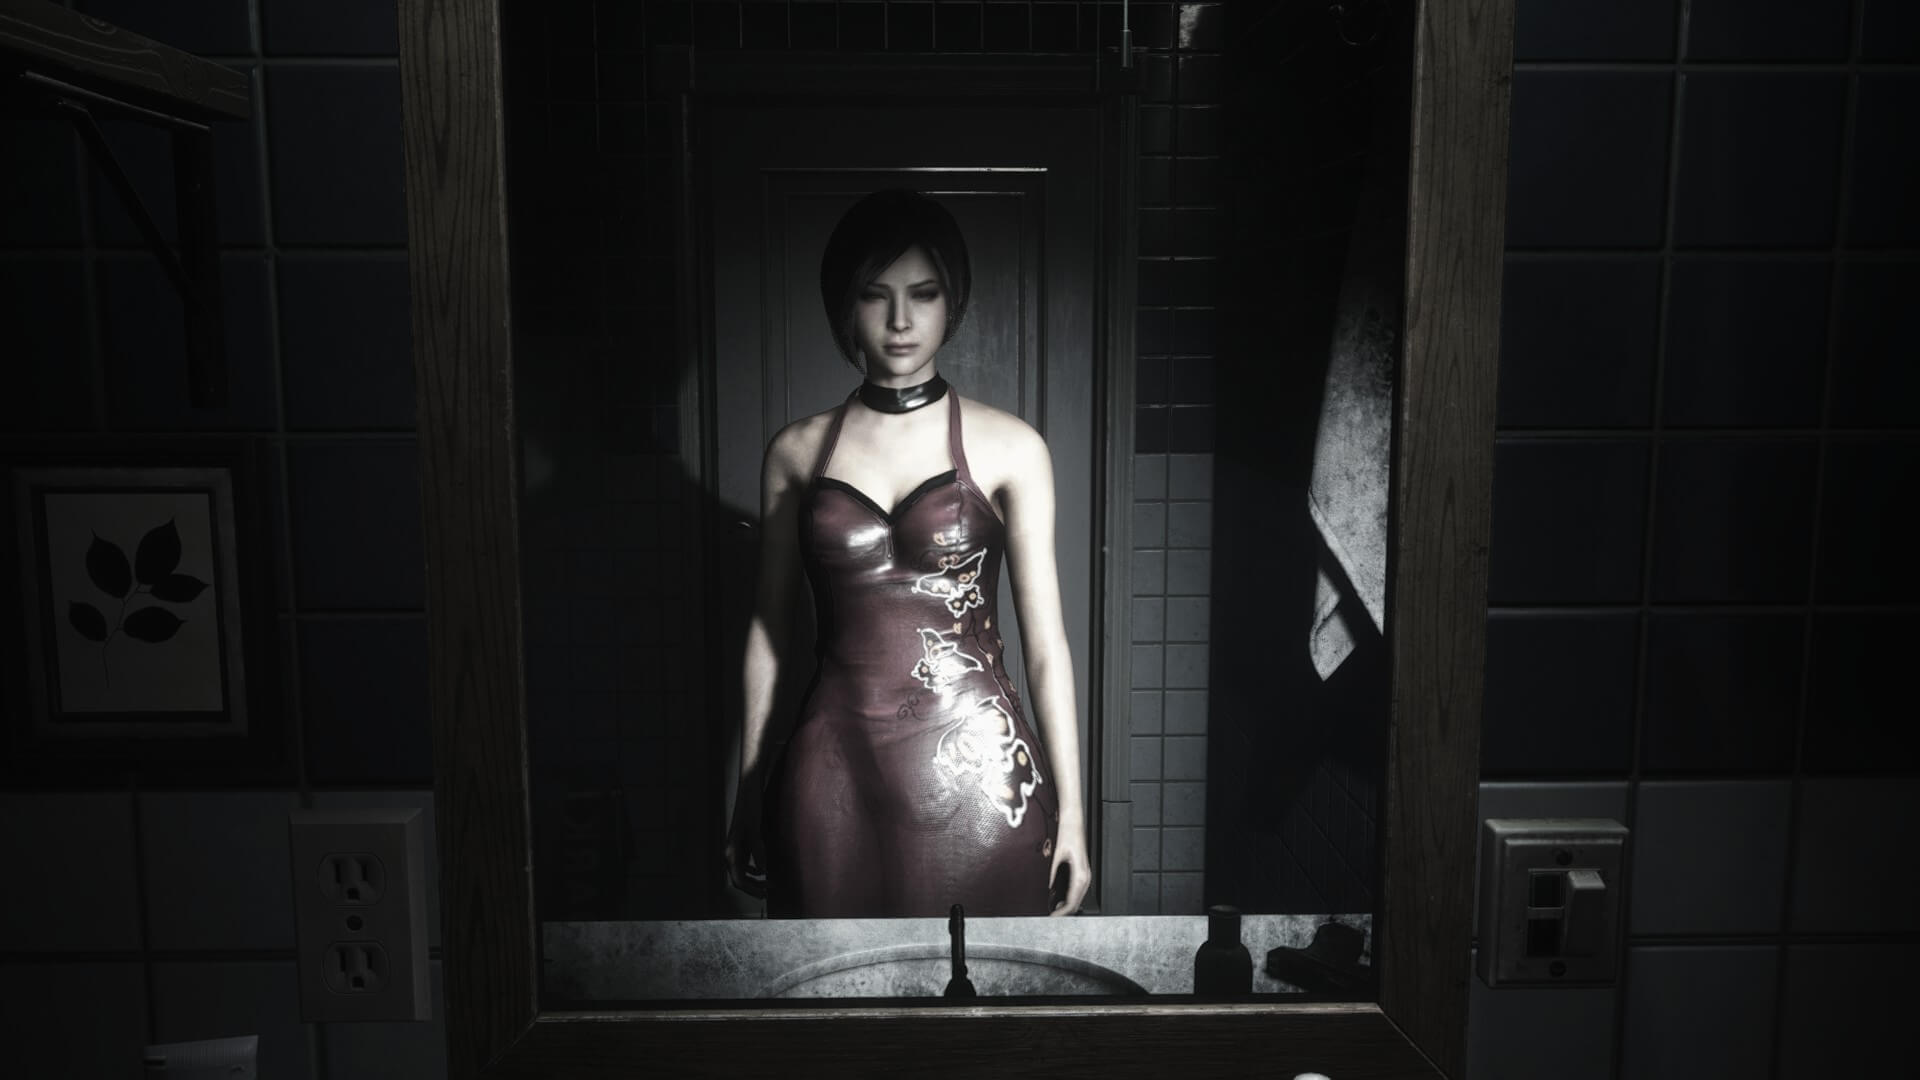 andre parran recommends resident evil 0 nude mod pic